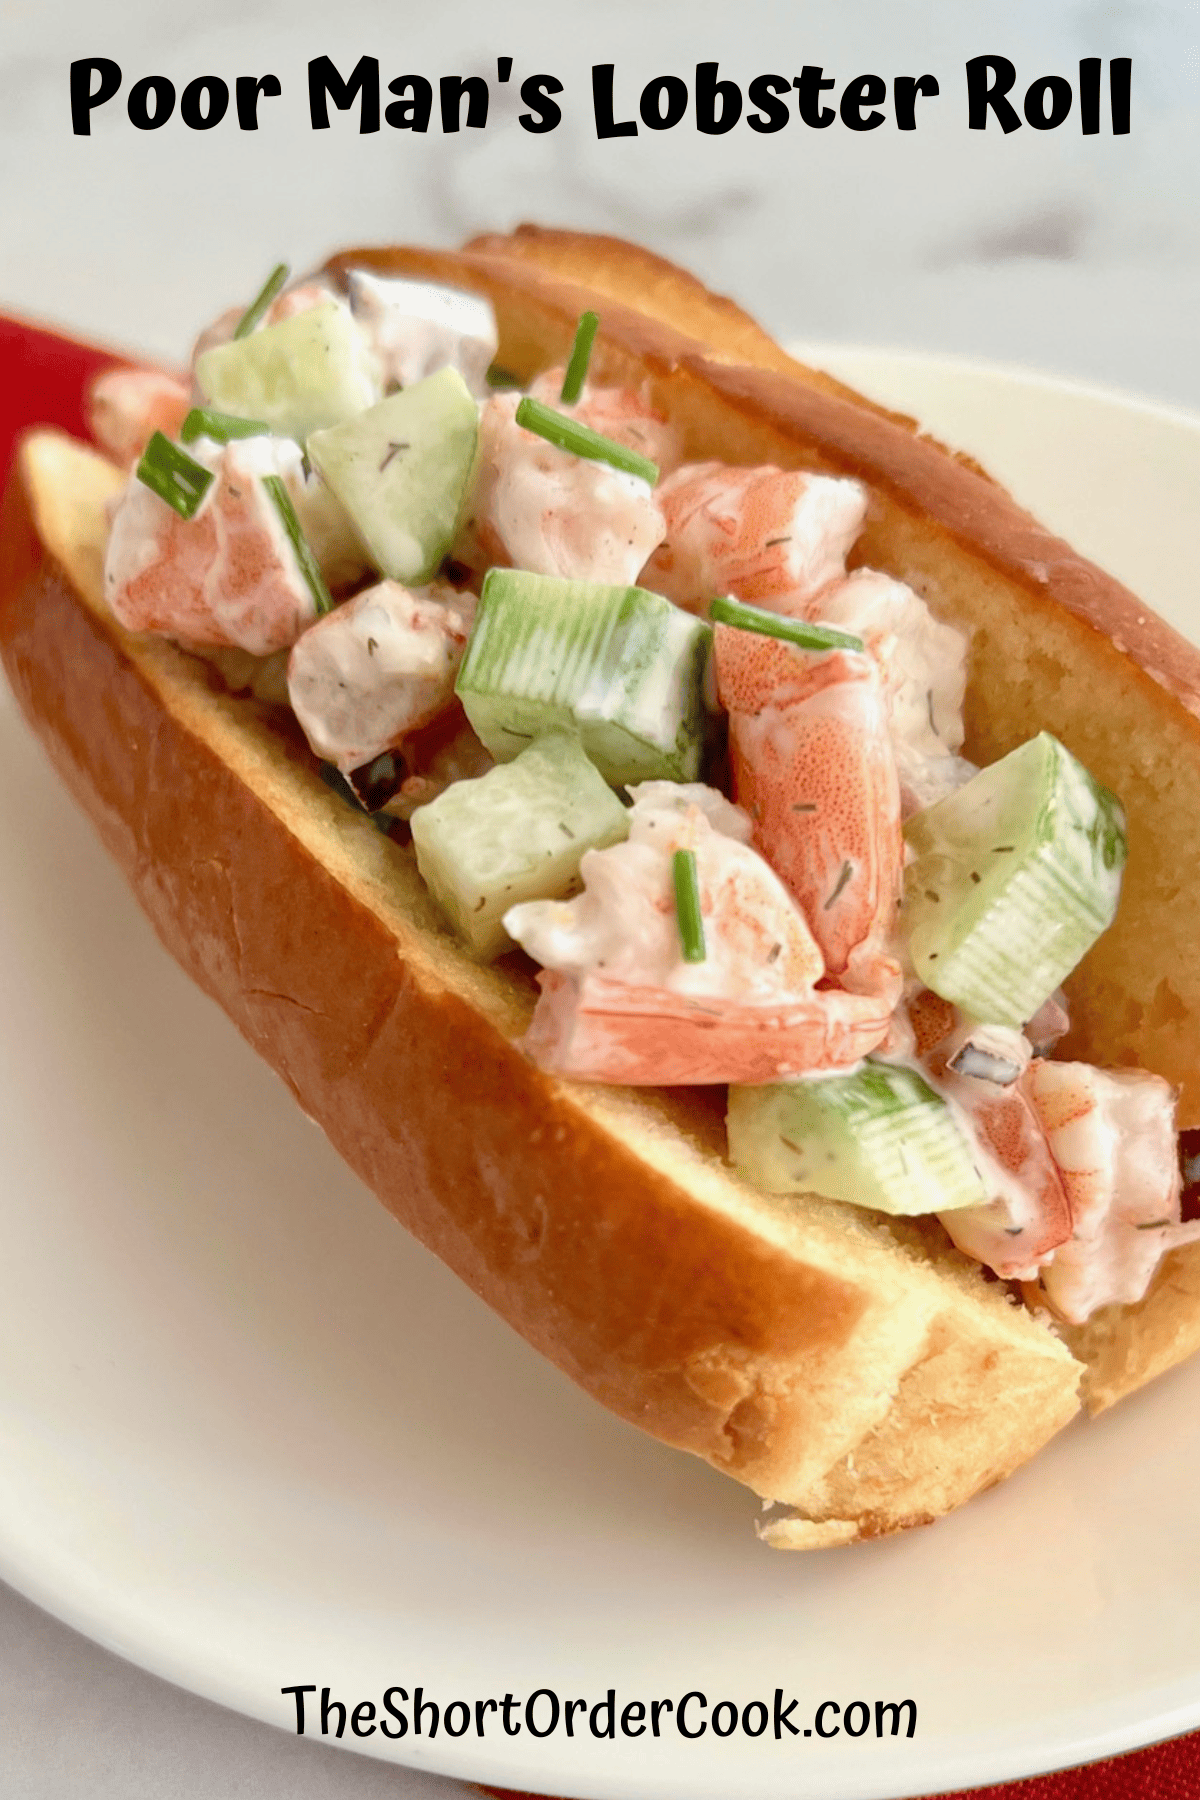 Poor Man's Lobster salad in a mayo dressing plated in a roll.